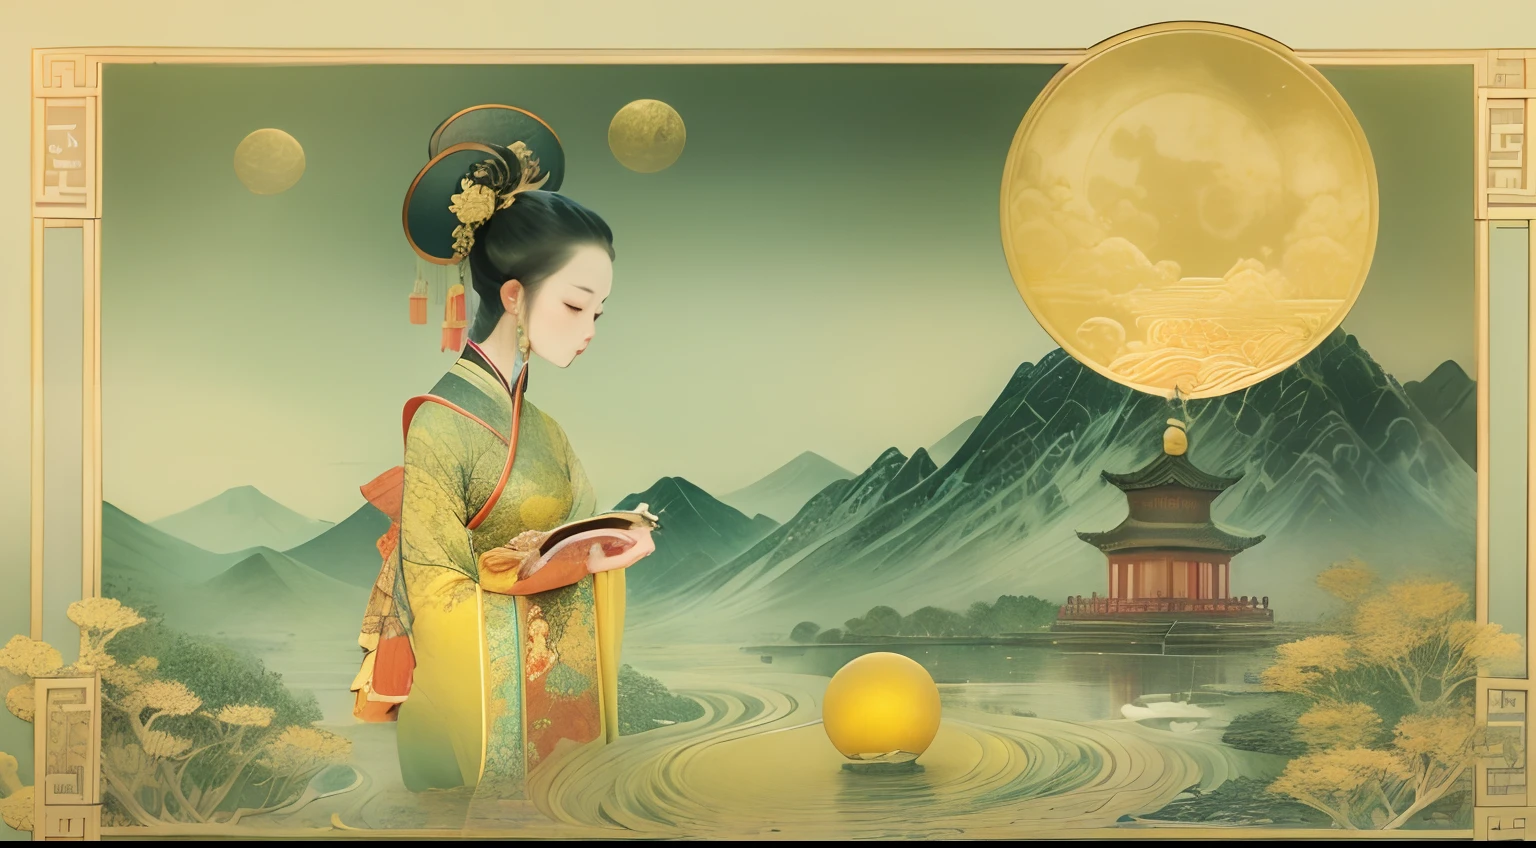 Bright, round golden yellow cratered moon，Chang'e fairy holds the jade rabbit in her hand，Round mooncakes of various colors with patterns，The background is in an empty field，lakeountain peaks, etc，It creates a tranquil atmosphere，